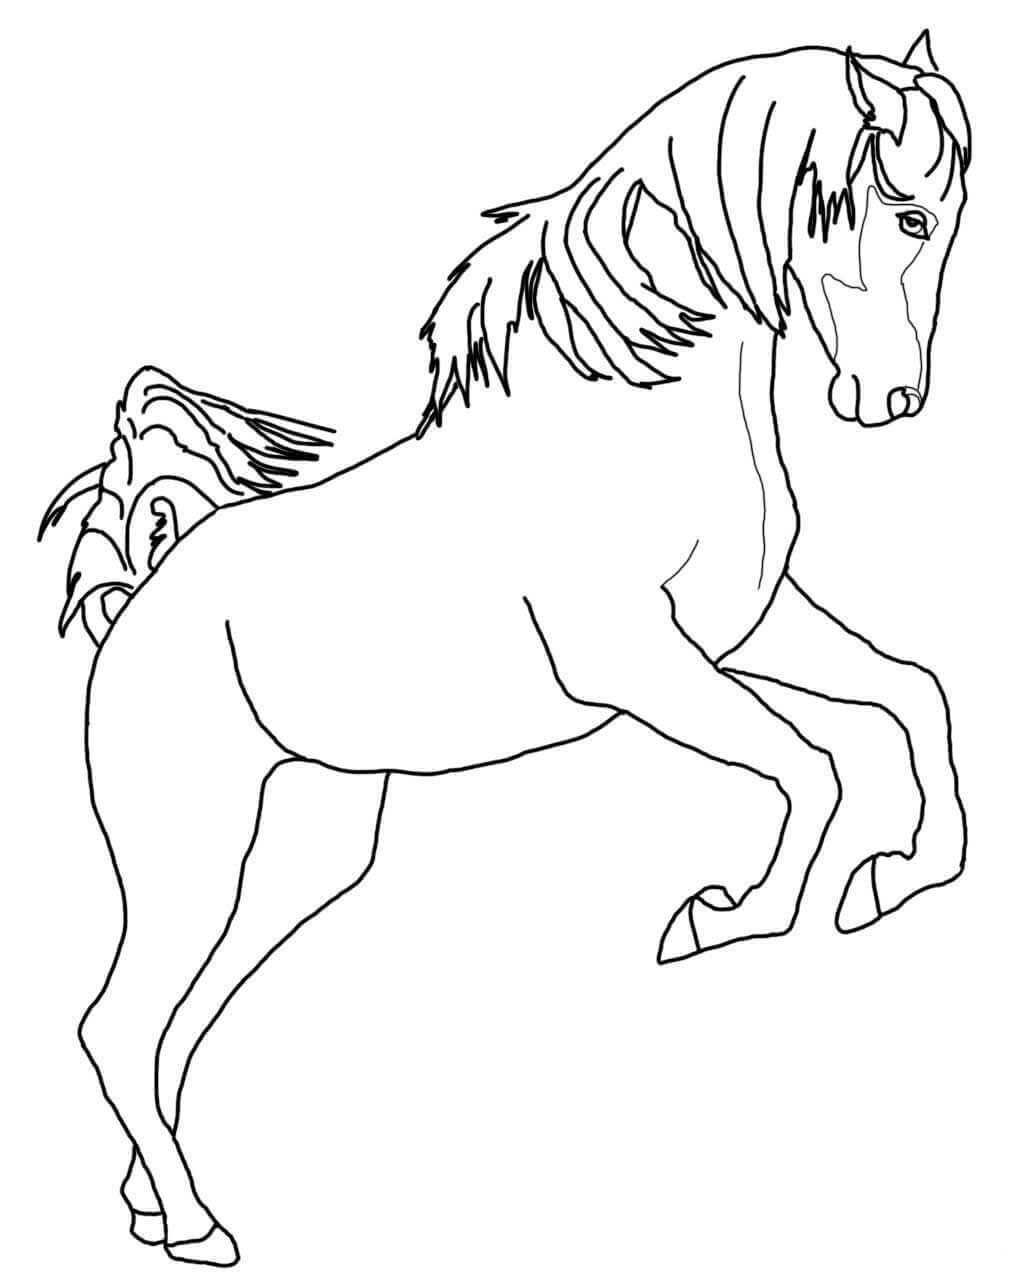 Rearing Arabian Horse Coloring Page Horse Coloring Pages Horse Coloring Horse Colorin